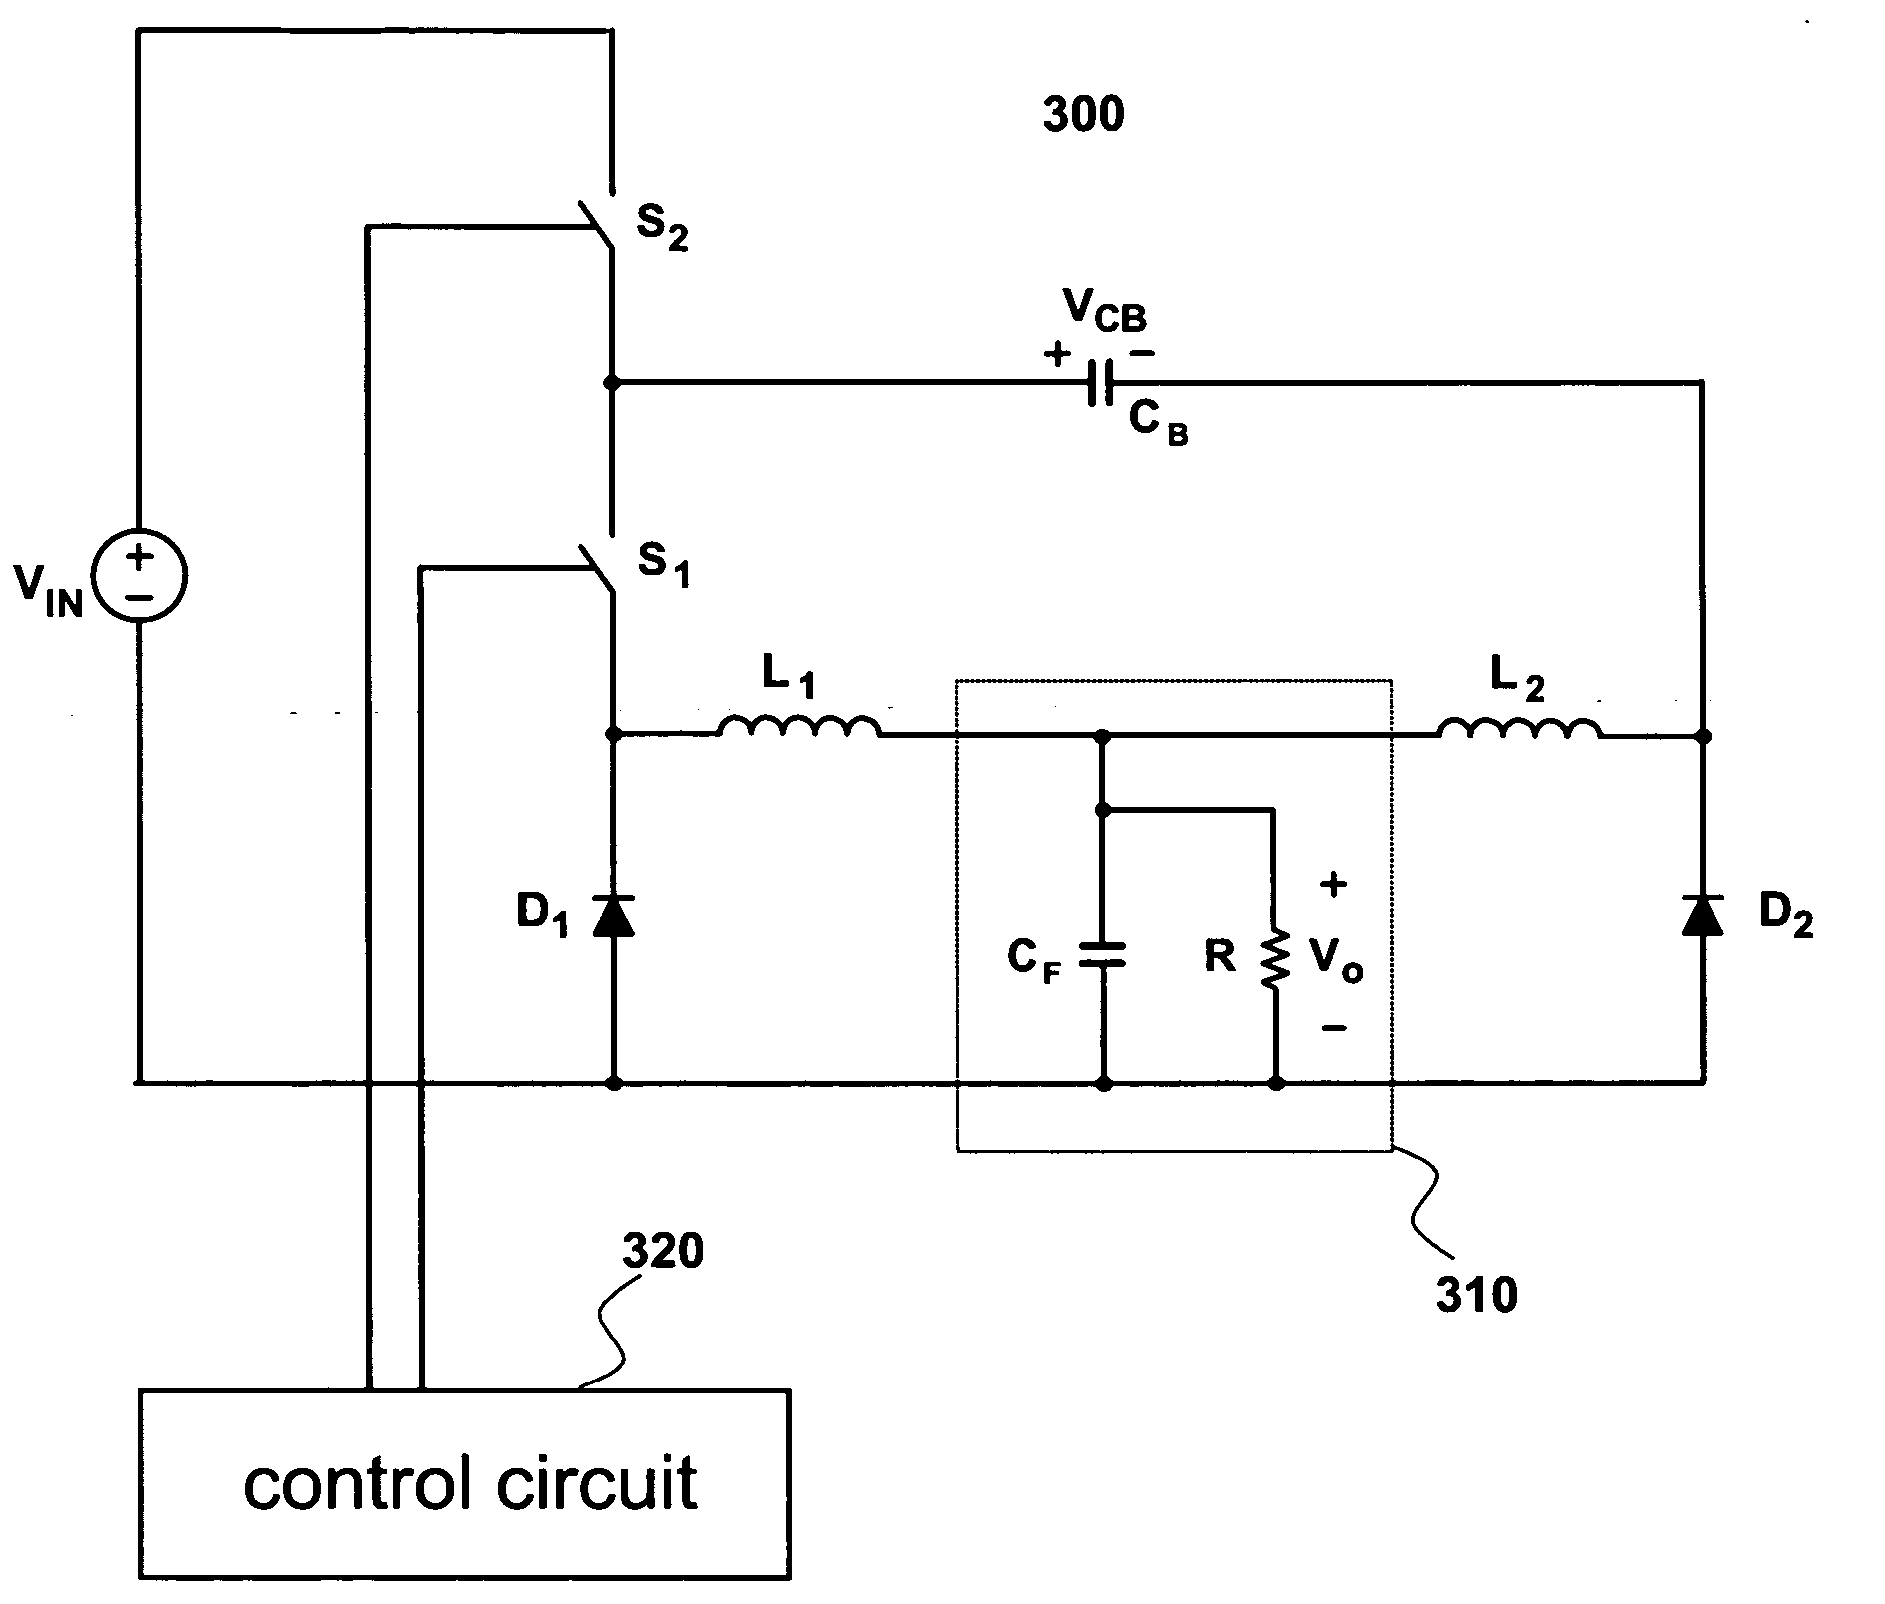 Non-isolated power conversion system having multiple switching power converters